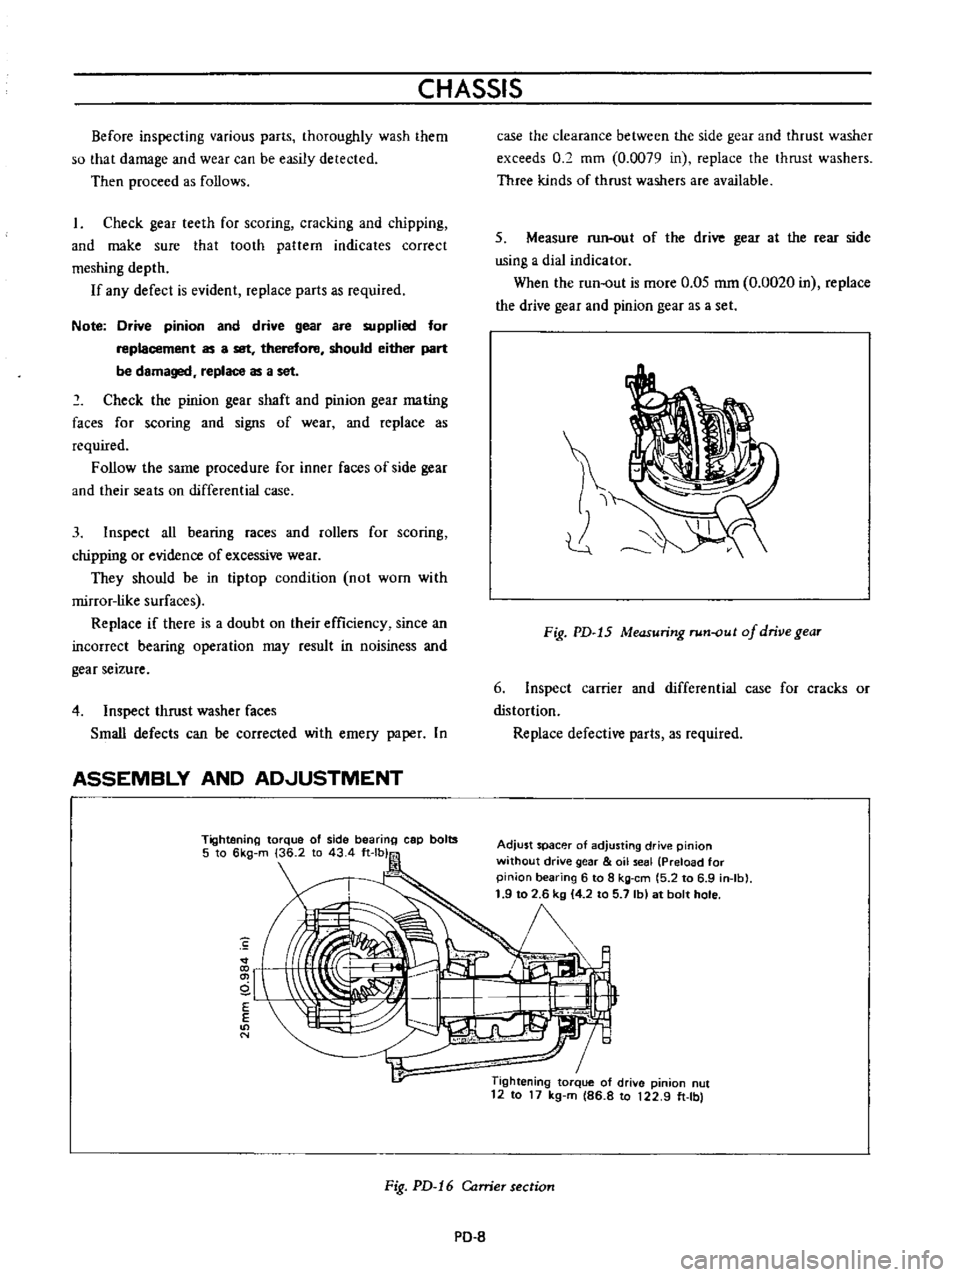 DATSUN B110 1973  Service Repair Manual 
CHASSIS

Before

inspecting 
various

parts 
thoroughly 
wash

them

so 
that

damage 
and 
wear

can 
be

easily 
detected

Then

proceed 
as

follows

Check

gear 
teeth 
for

scoring 
cracking 
an